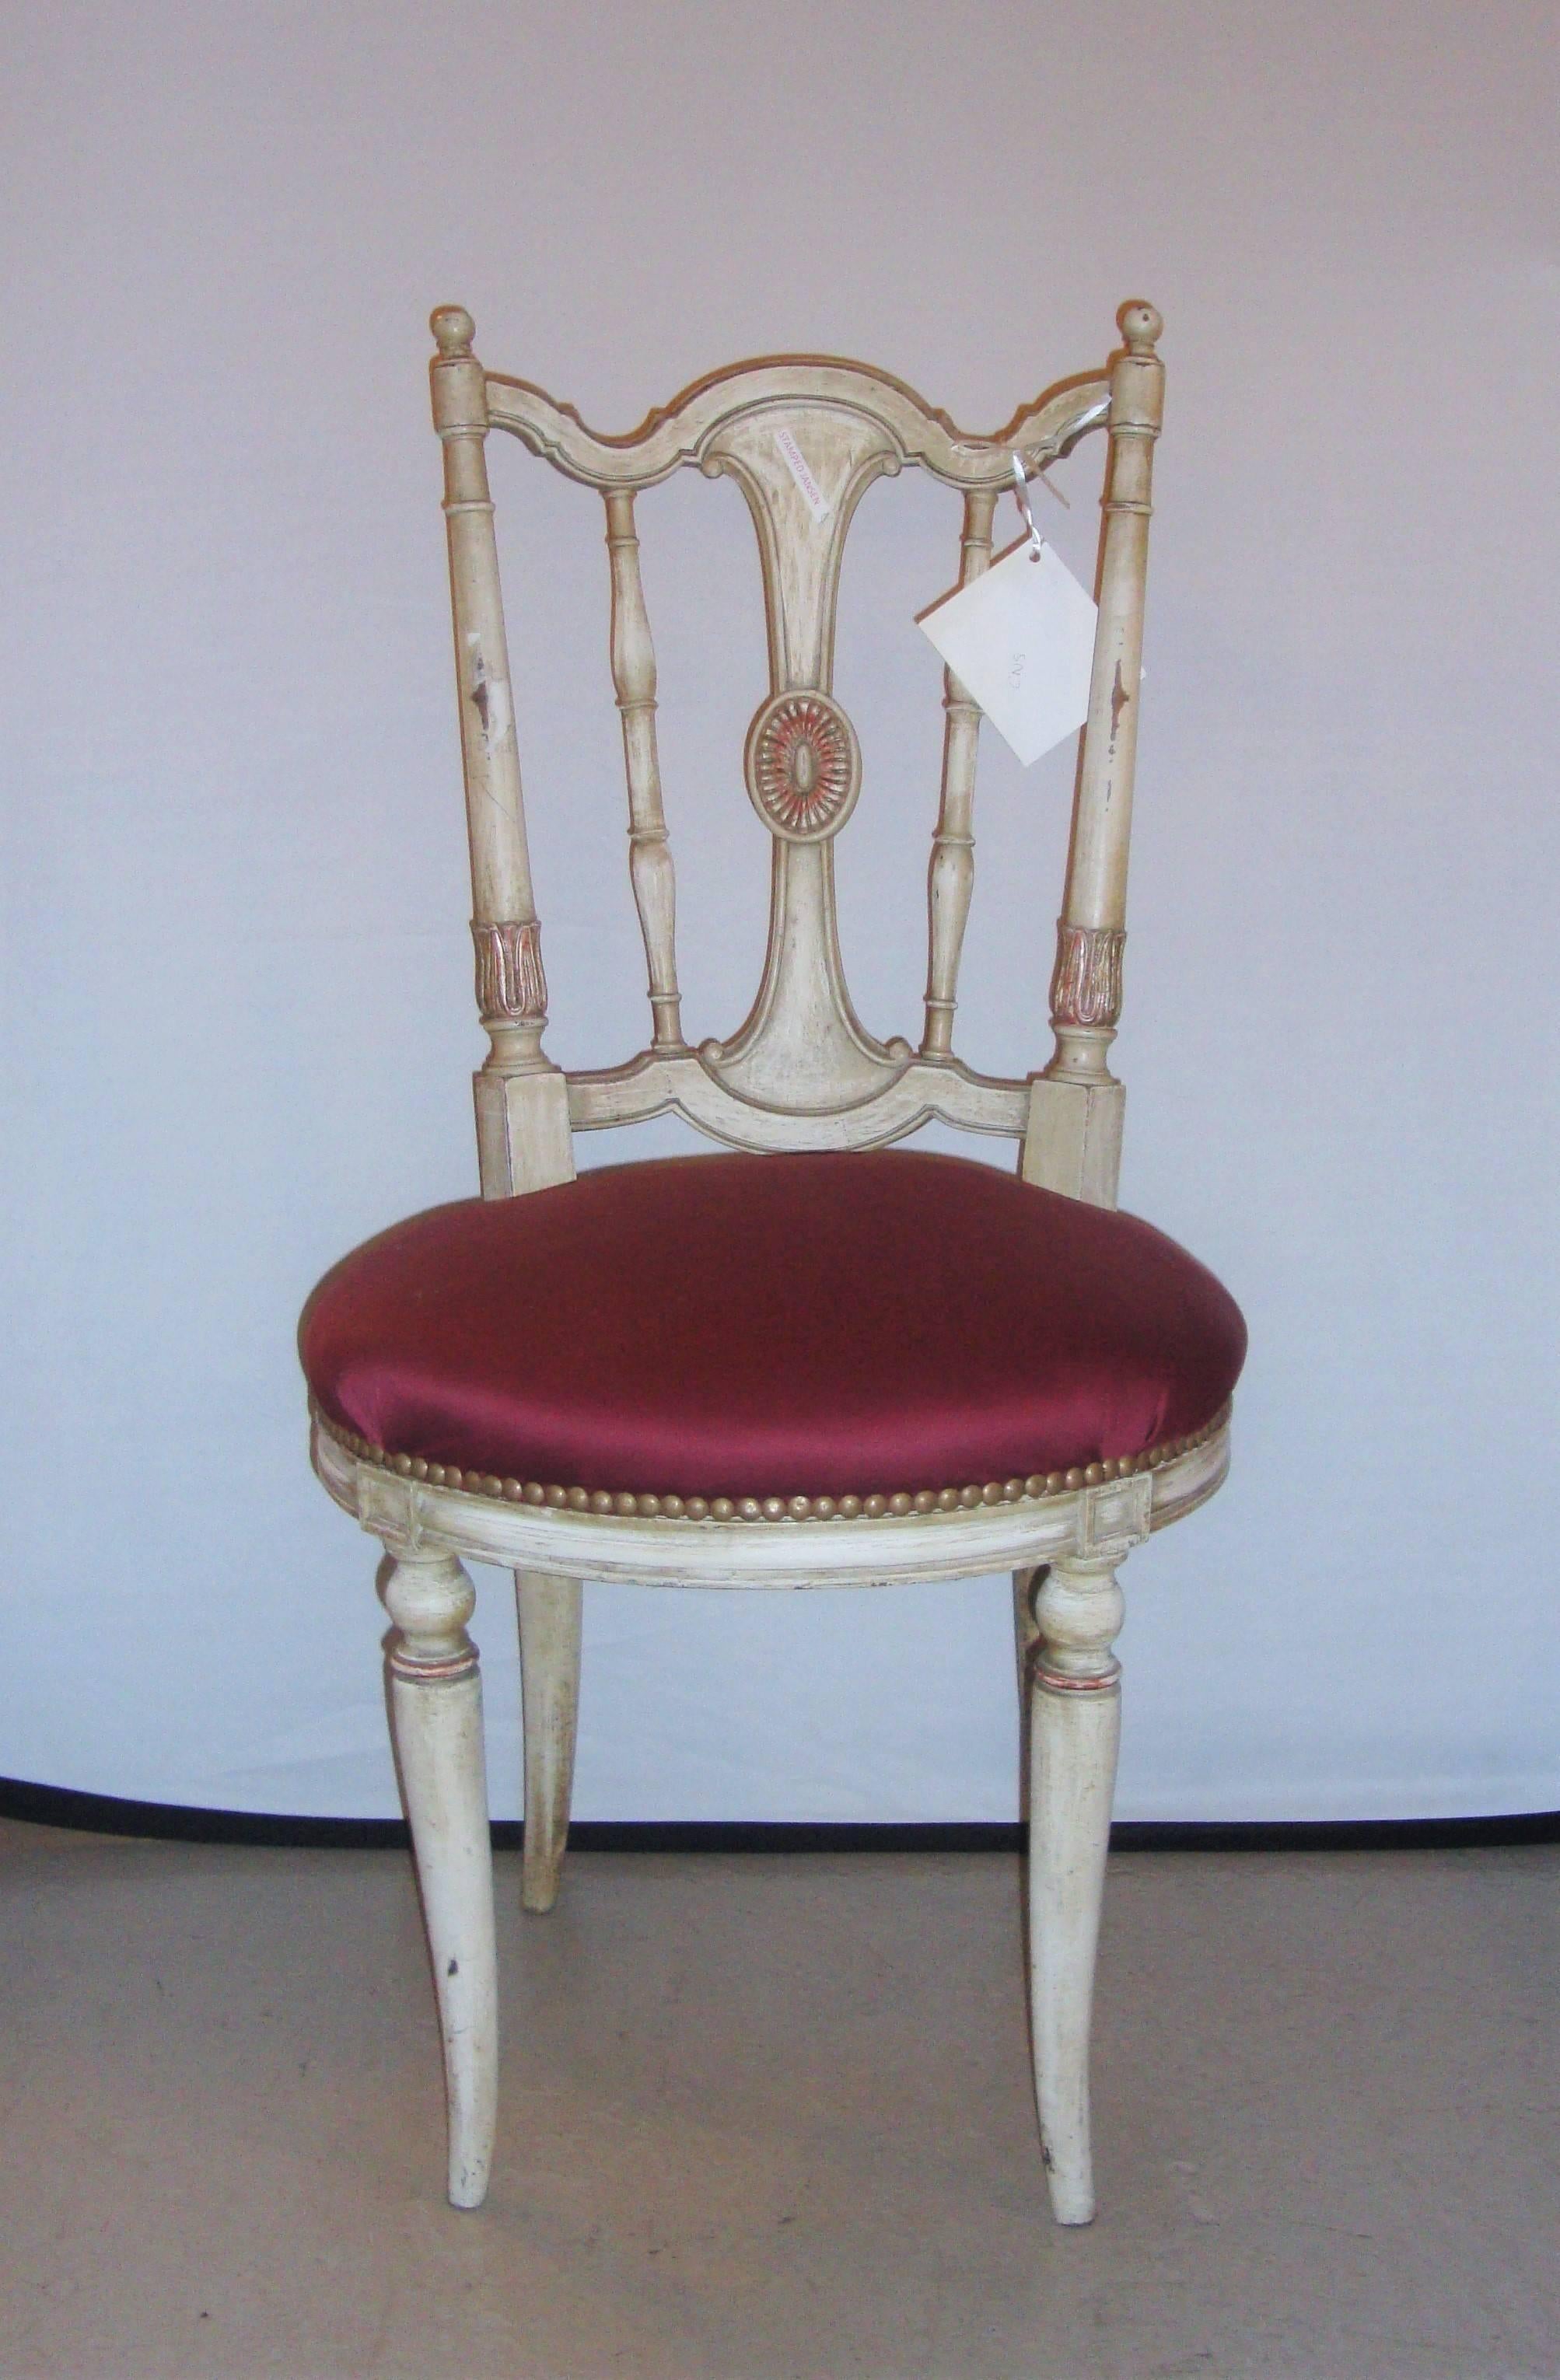 Distress painted lady’s side or desk chair. This circa 1930s side chair has been finely painted in a distressed finish with worn gilt over clay. The shield back supported by an overstuffed seat and curved lets.